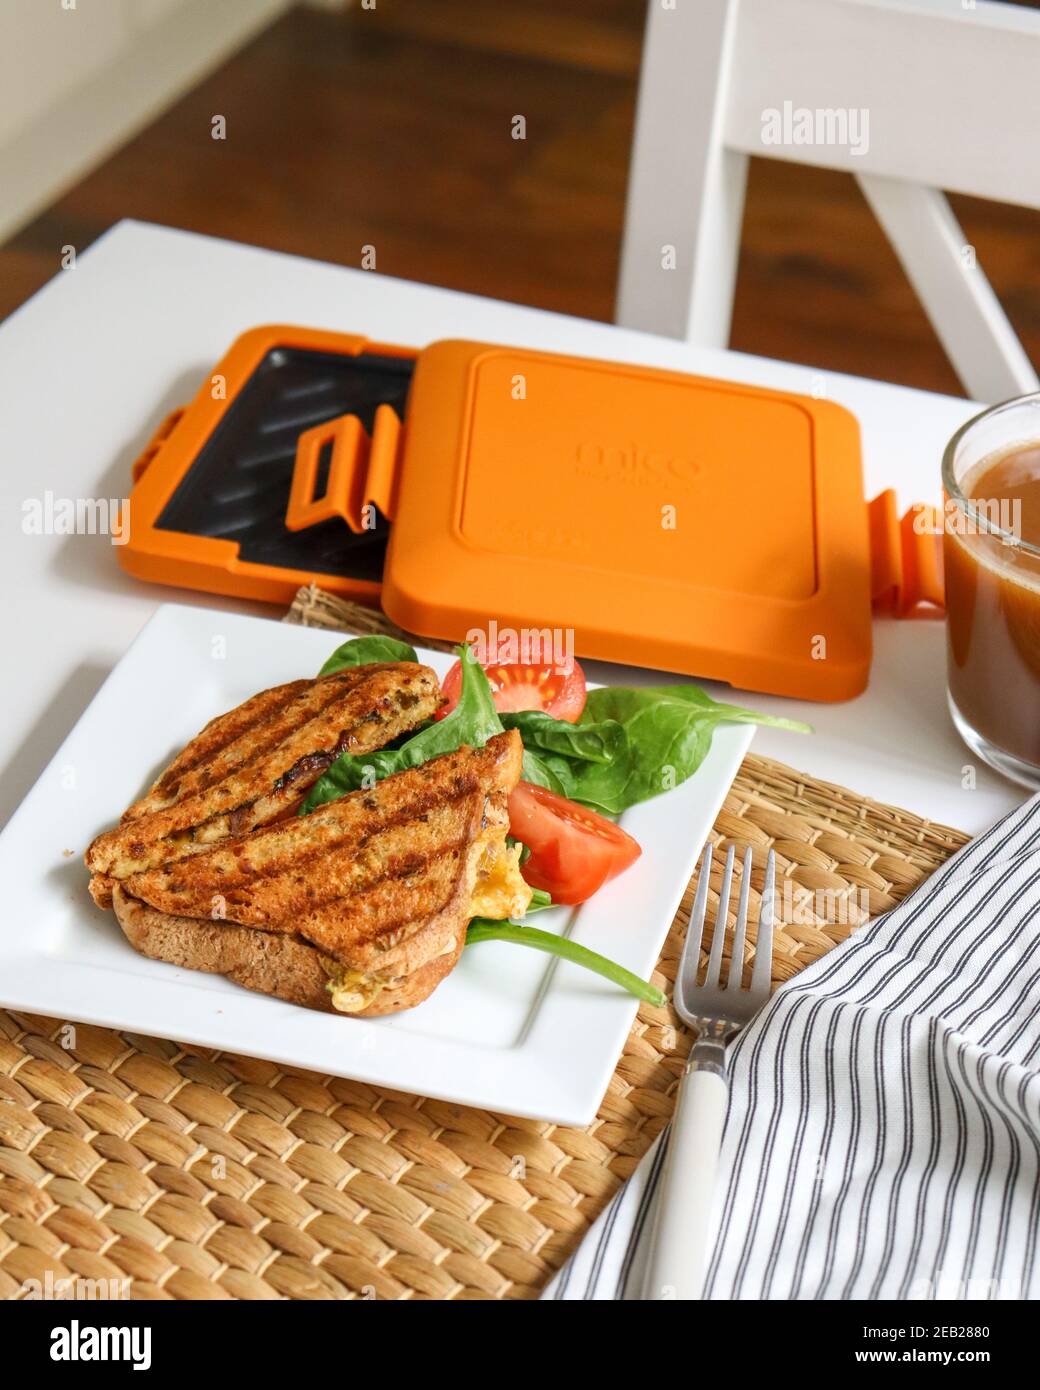 MICROWAVE TOASTED TOASTIE Sandwich Maker Cafe Toaster $79.95